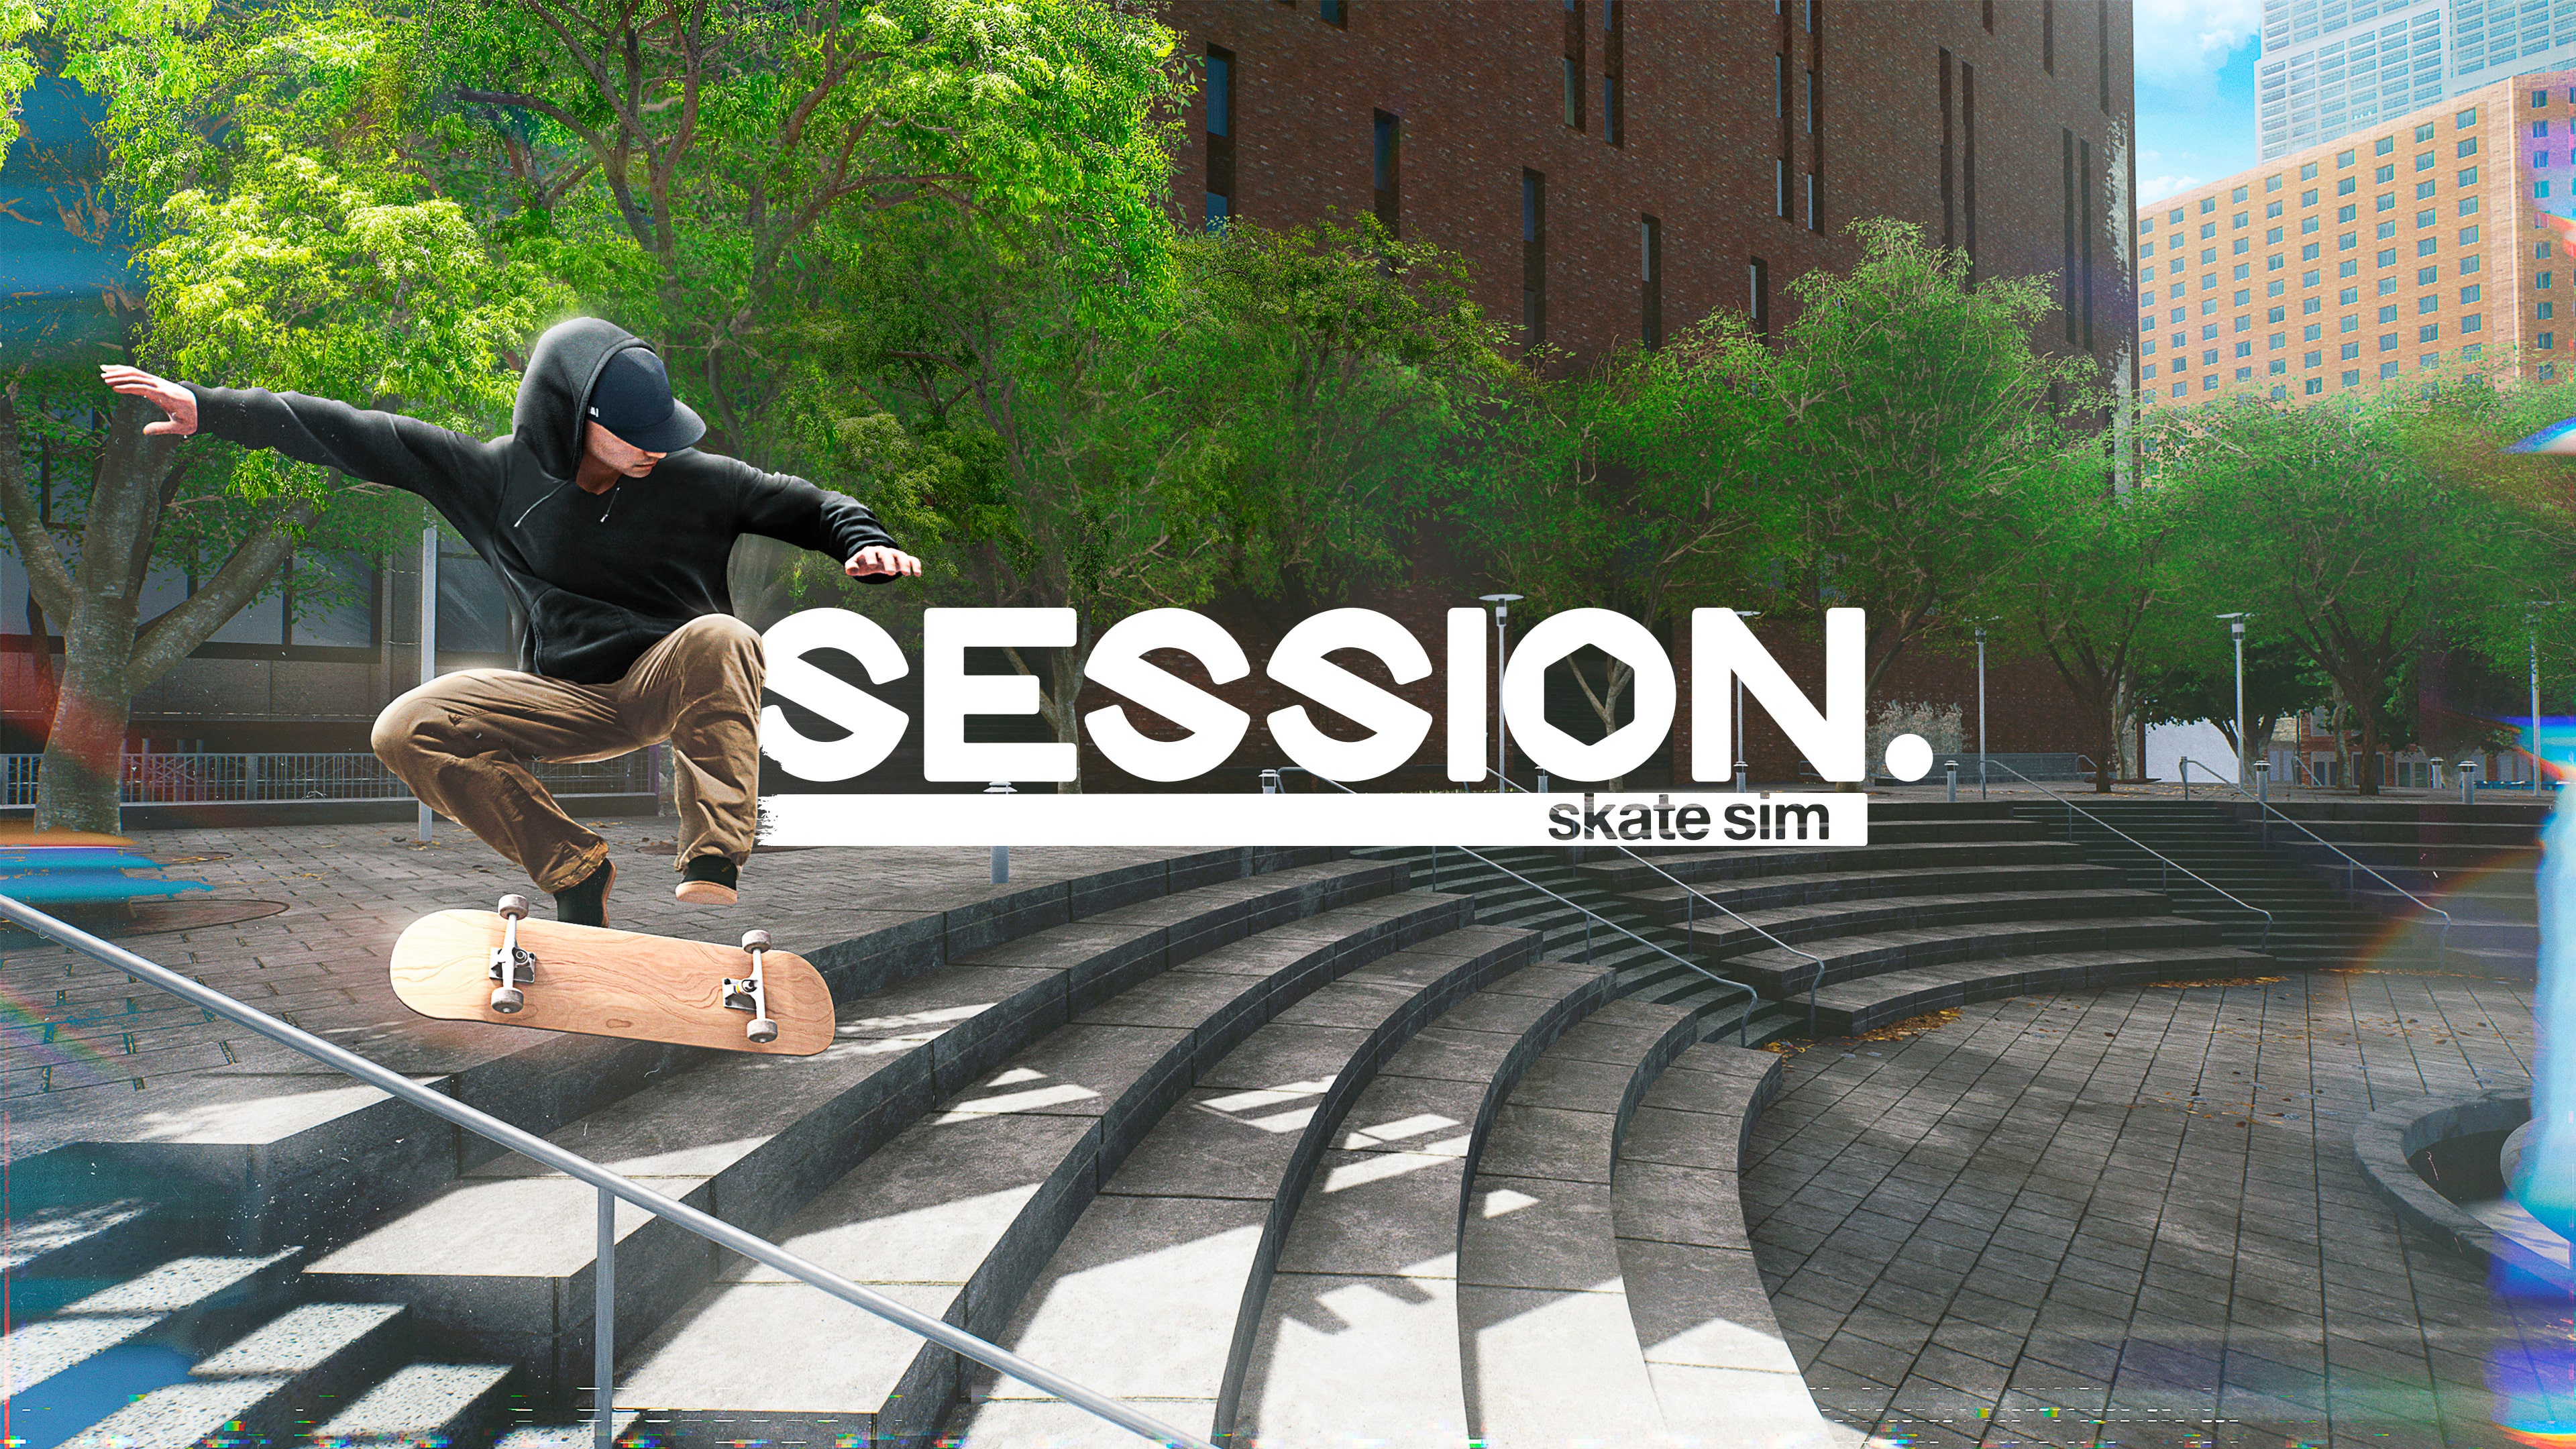 Session: Skate Sim (Simplified Chinese, English, Korean, Japanese, Traditional Chinese)